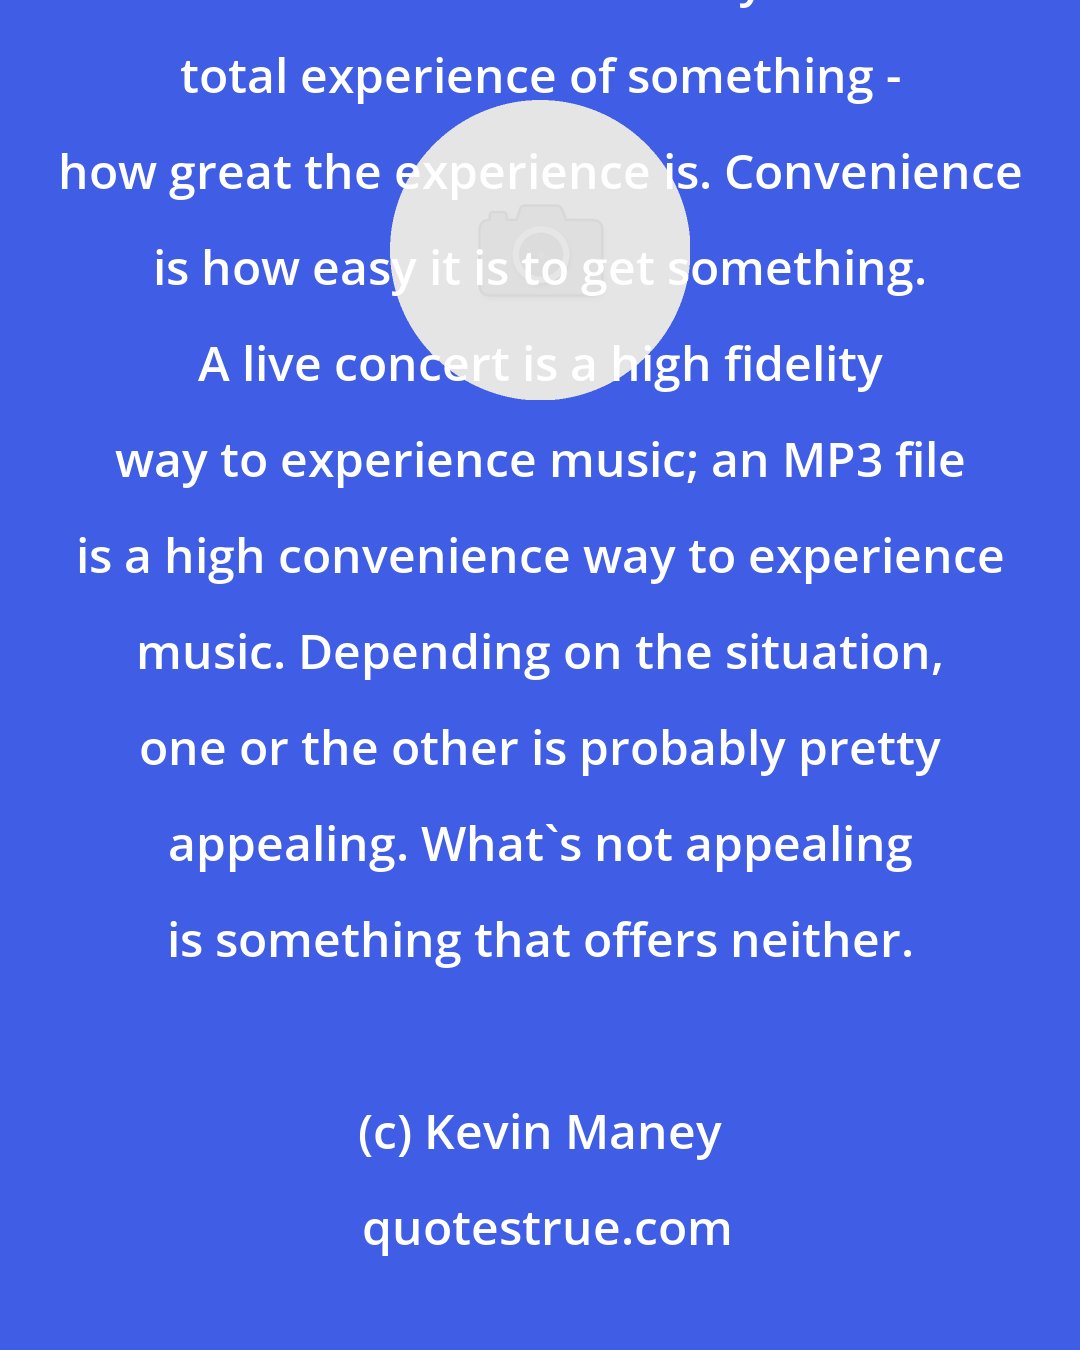 Kevin Maney: Every purchasing decision involves a trade-off between what I call fidelity and convenience. Fidelity is the total experience of something - how great the experience is. Convenience is how easy it is to get something. A live concert is a high fidelity way to experience music; an MP3 file is a high convenience way to experience music. Depending on the situation, one or the other is probably pretty appealing. What's not appealing is something that offers neither.